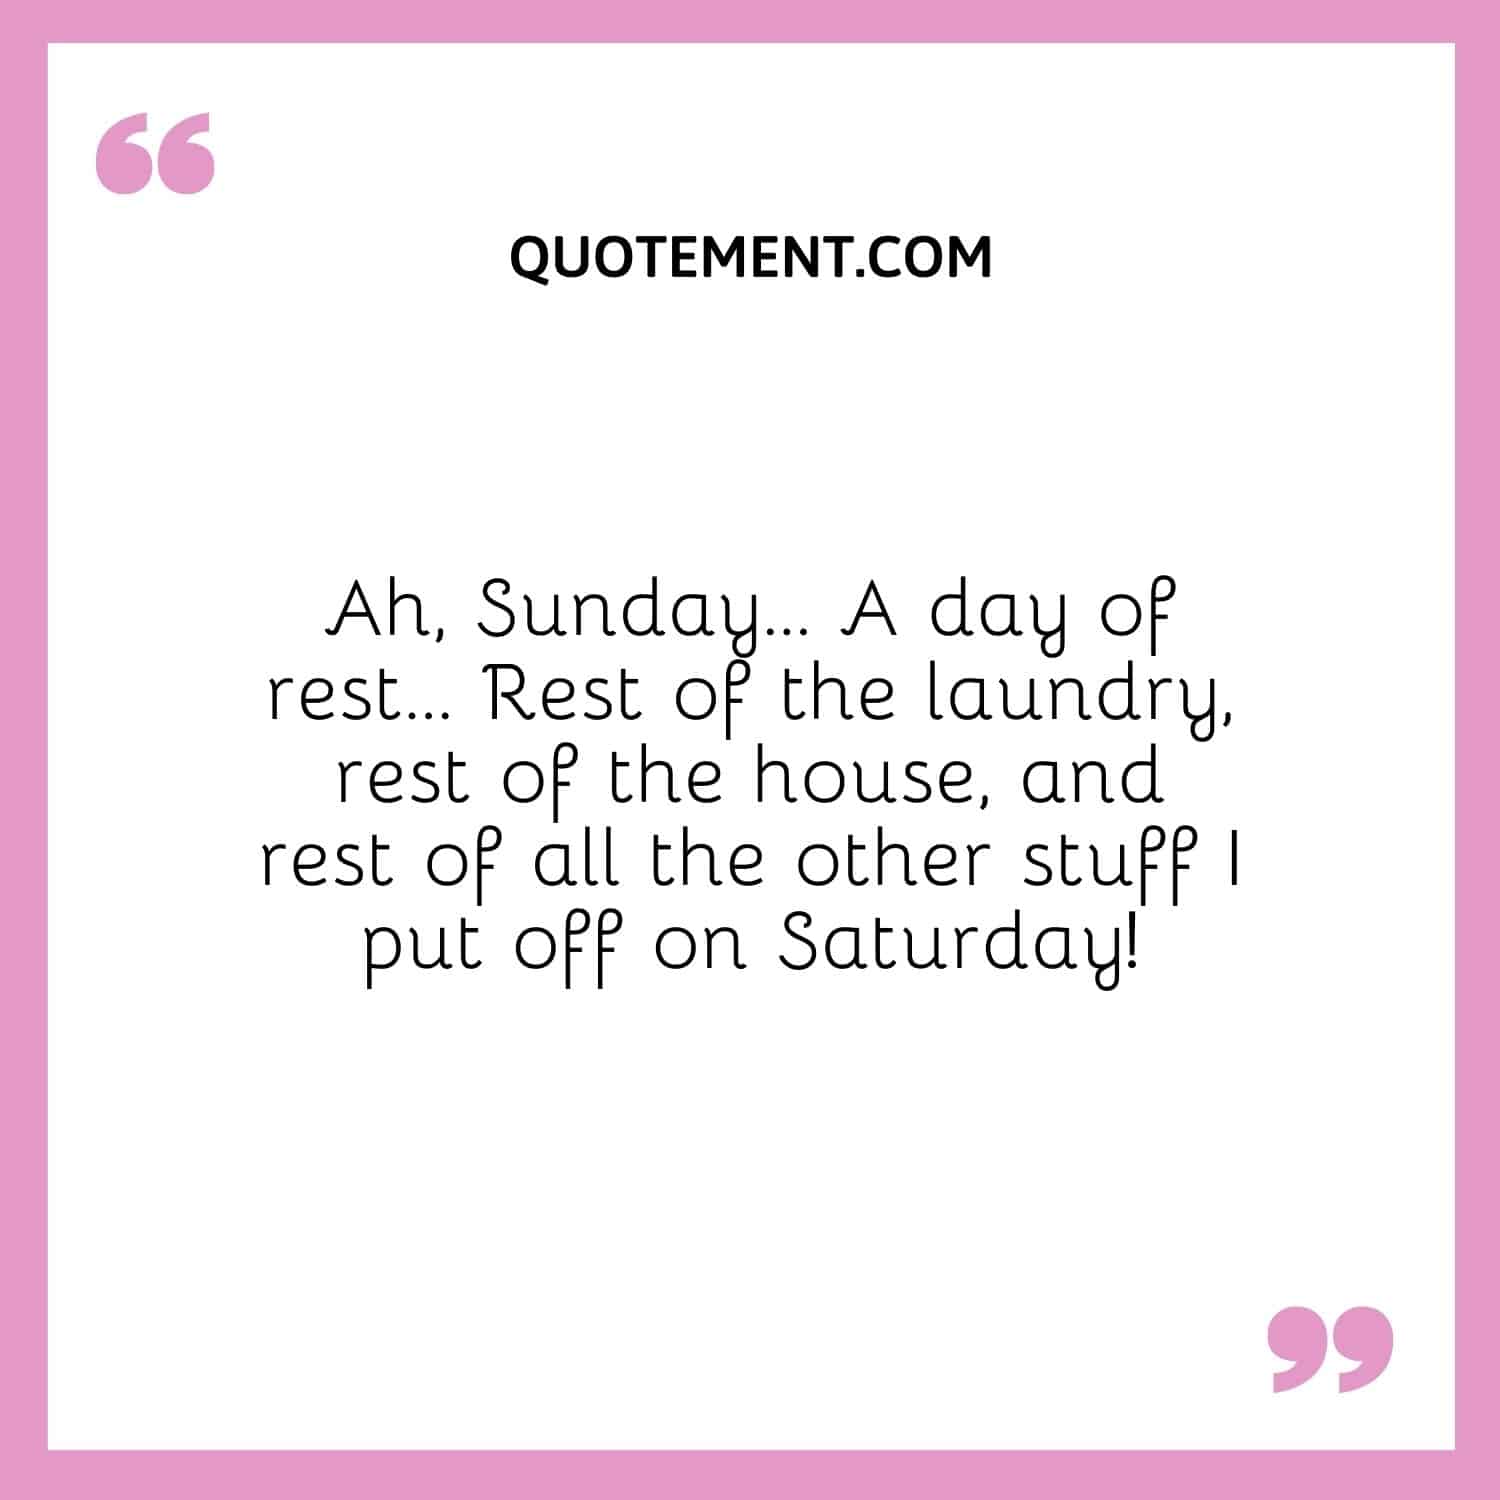 Ah, Sunday… A day of rest…